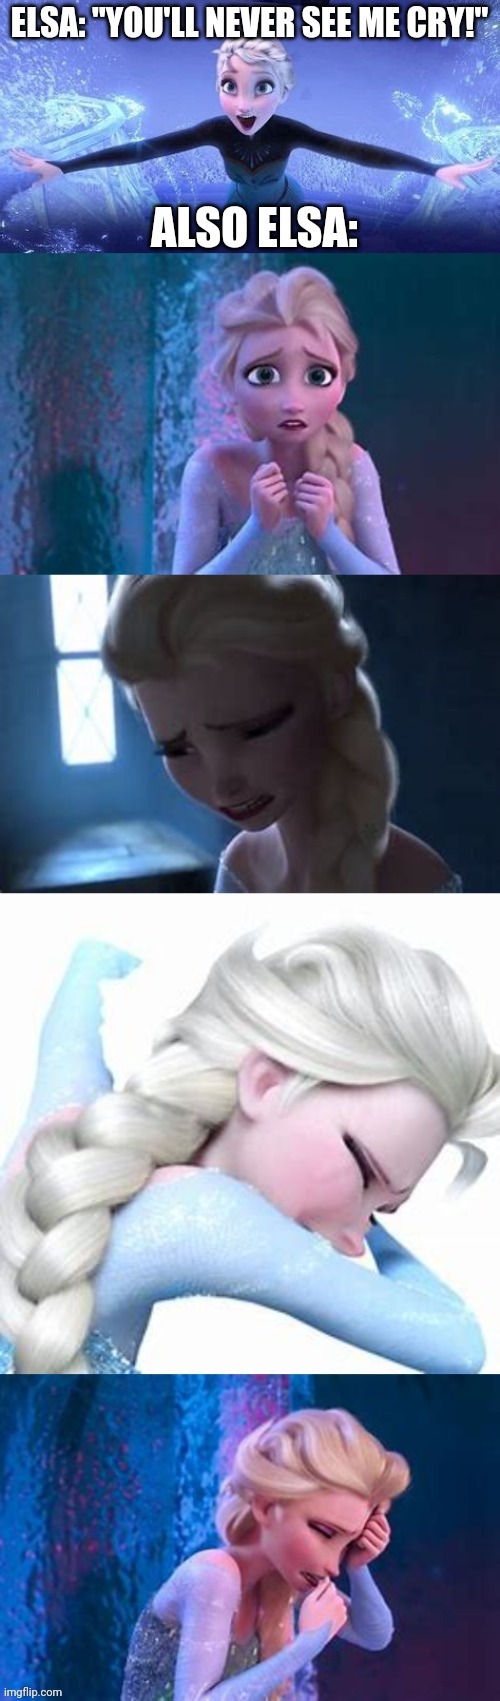 You'll never see me cry | image tagged in elsa,frozen,irony | made w/ Imgflip meme maker